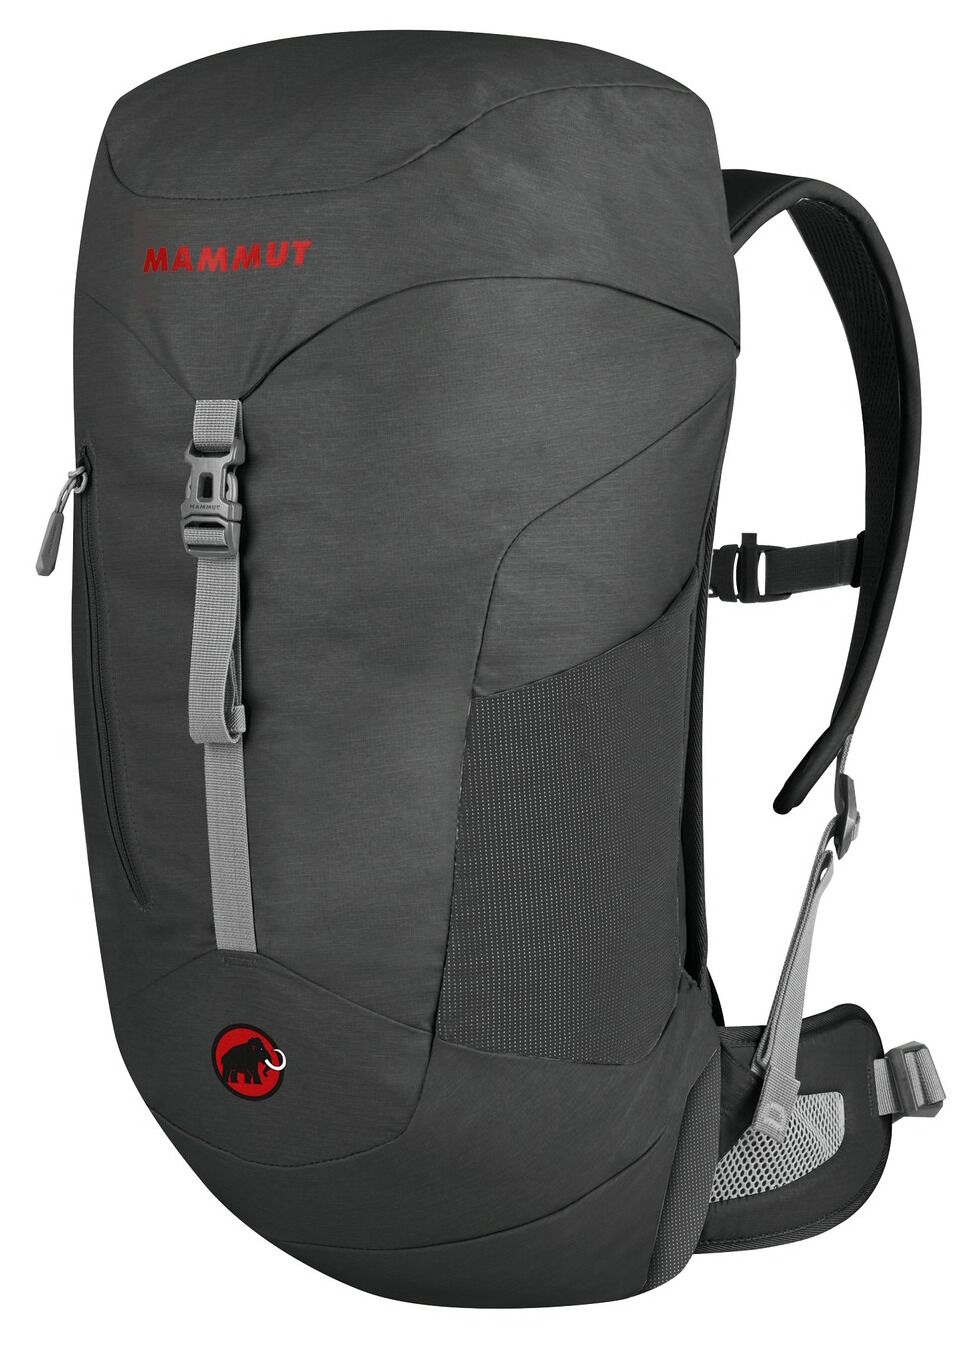 Mammut - Creon Tour - Backpack